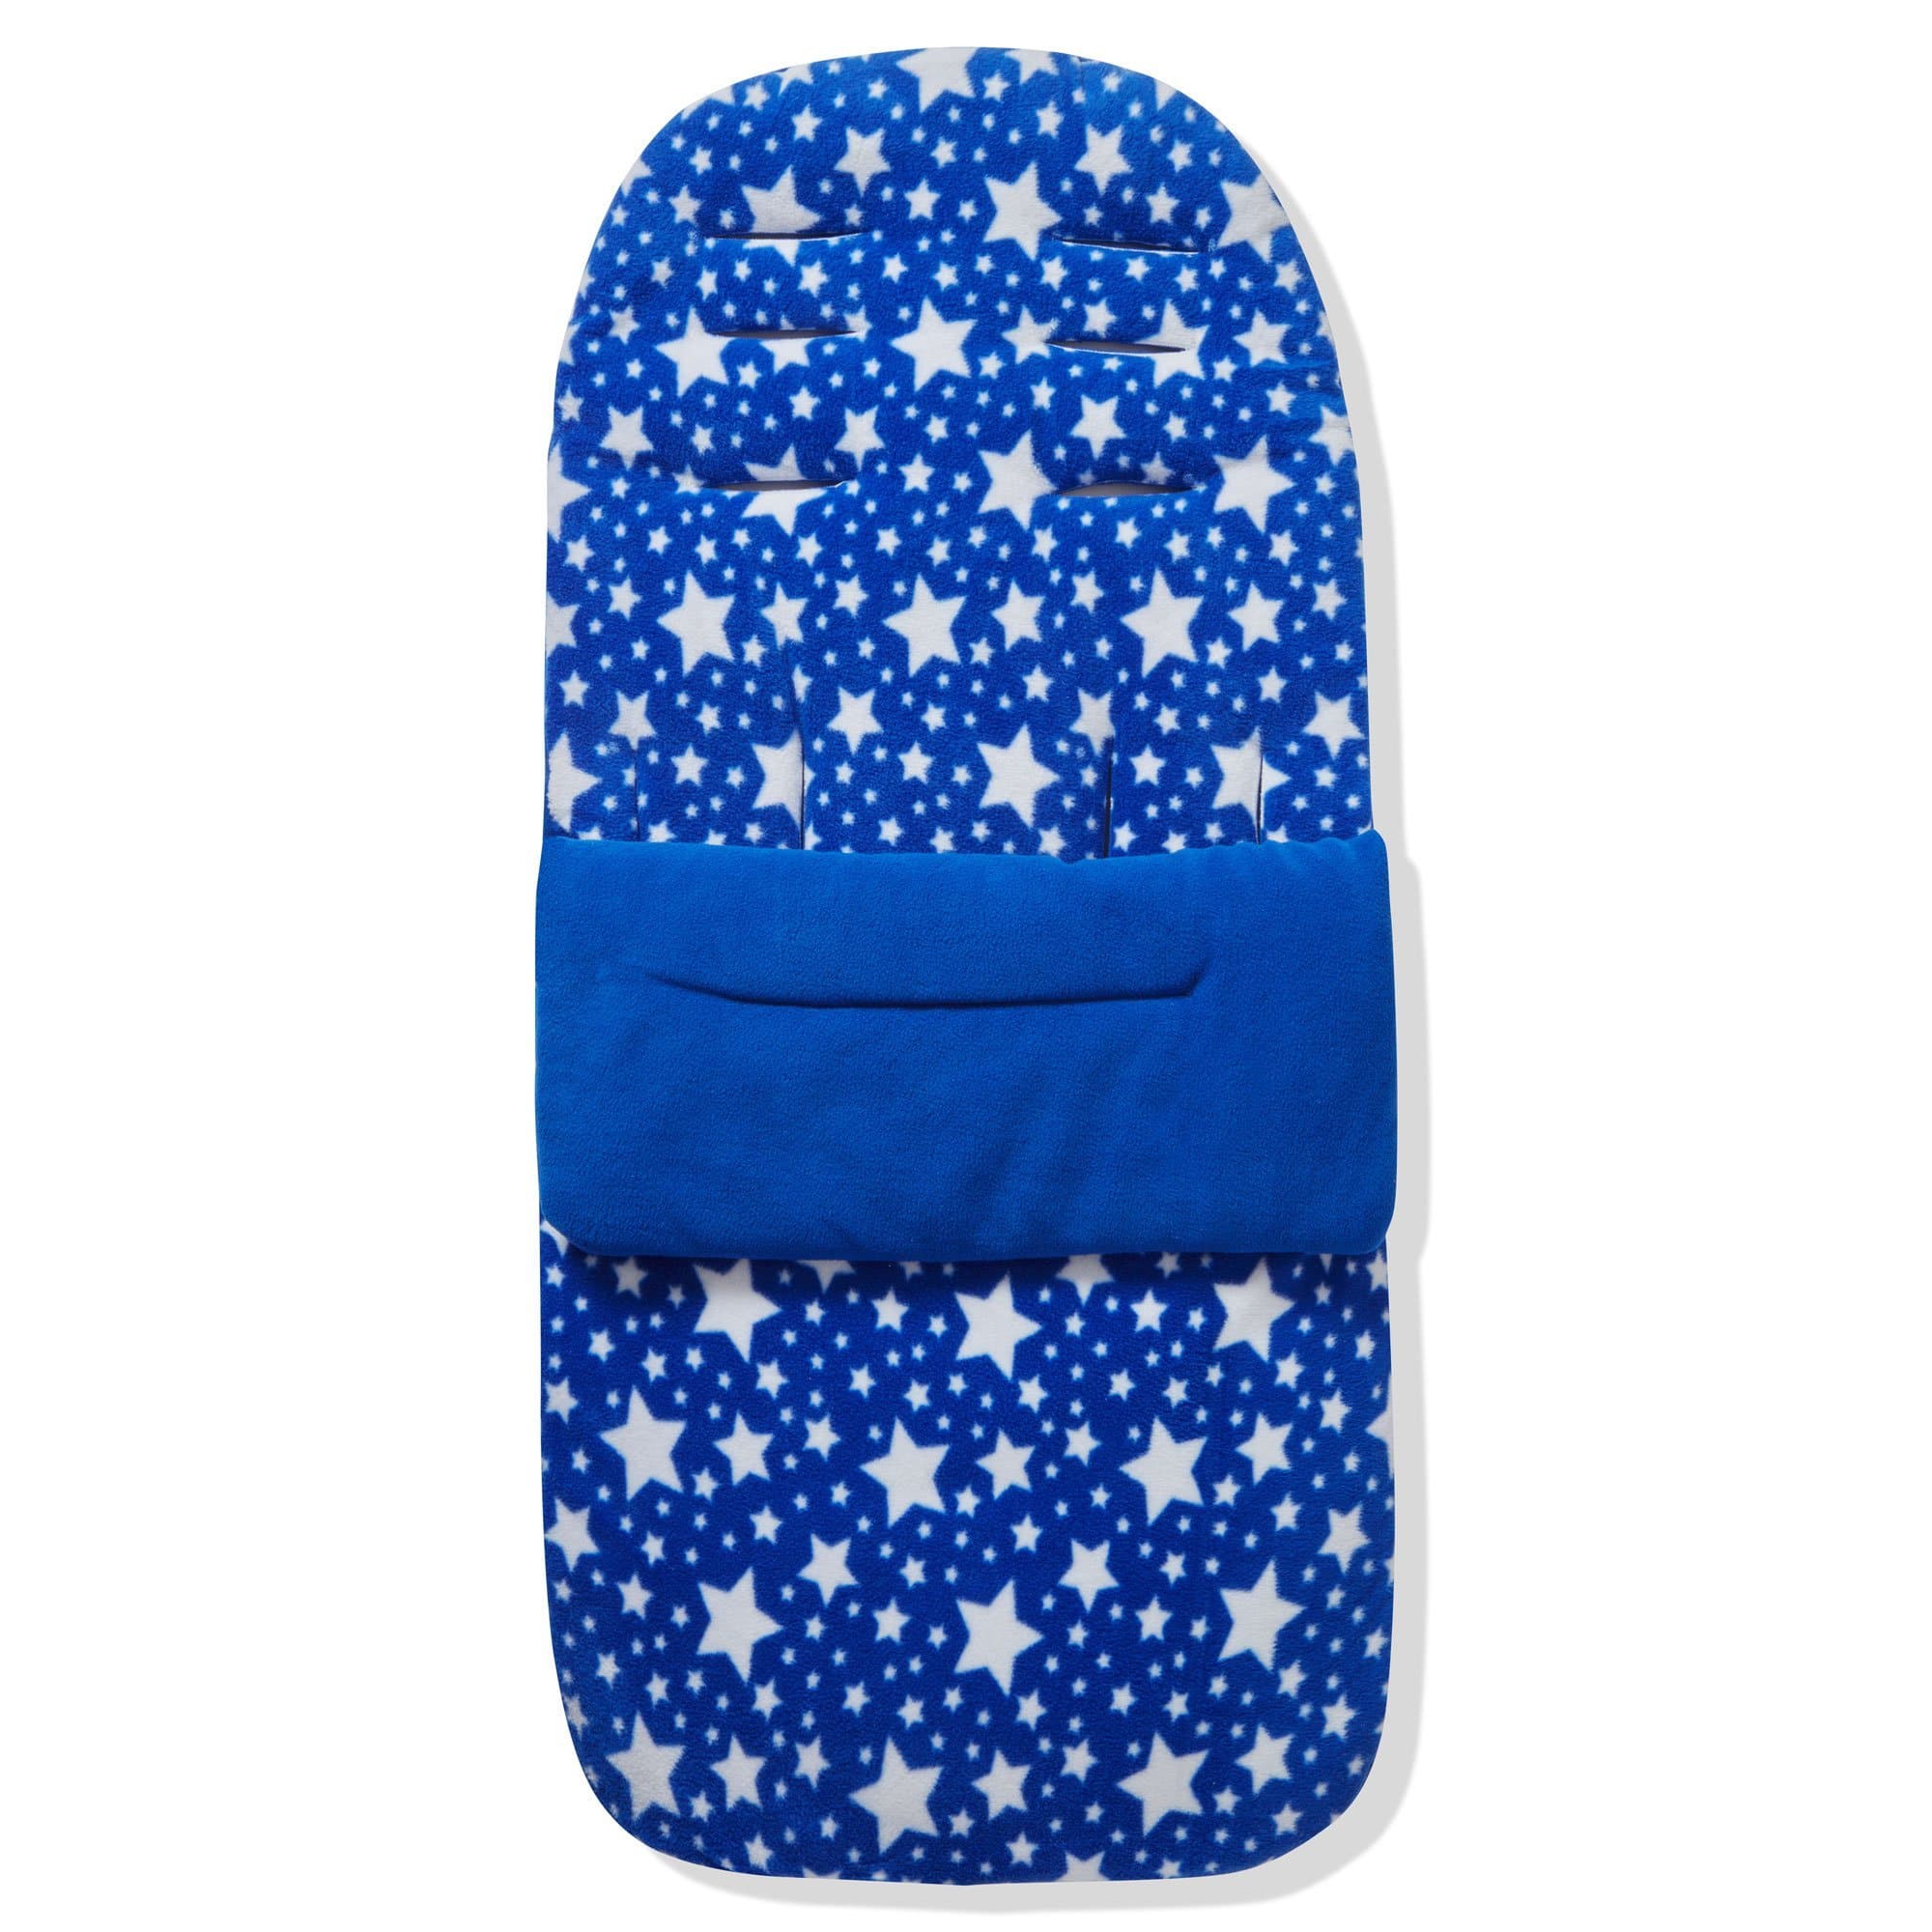 Fleece Footmuff / Cosy Toes Compatible with Mutsy - For Your Little One